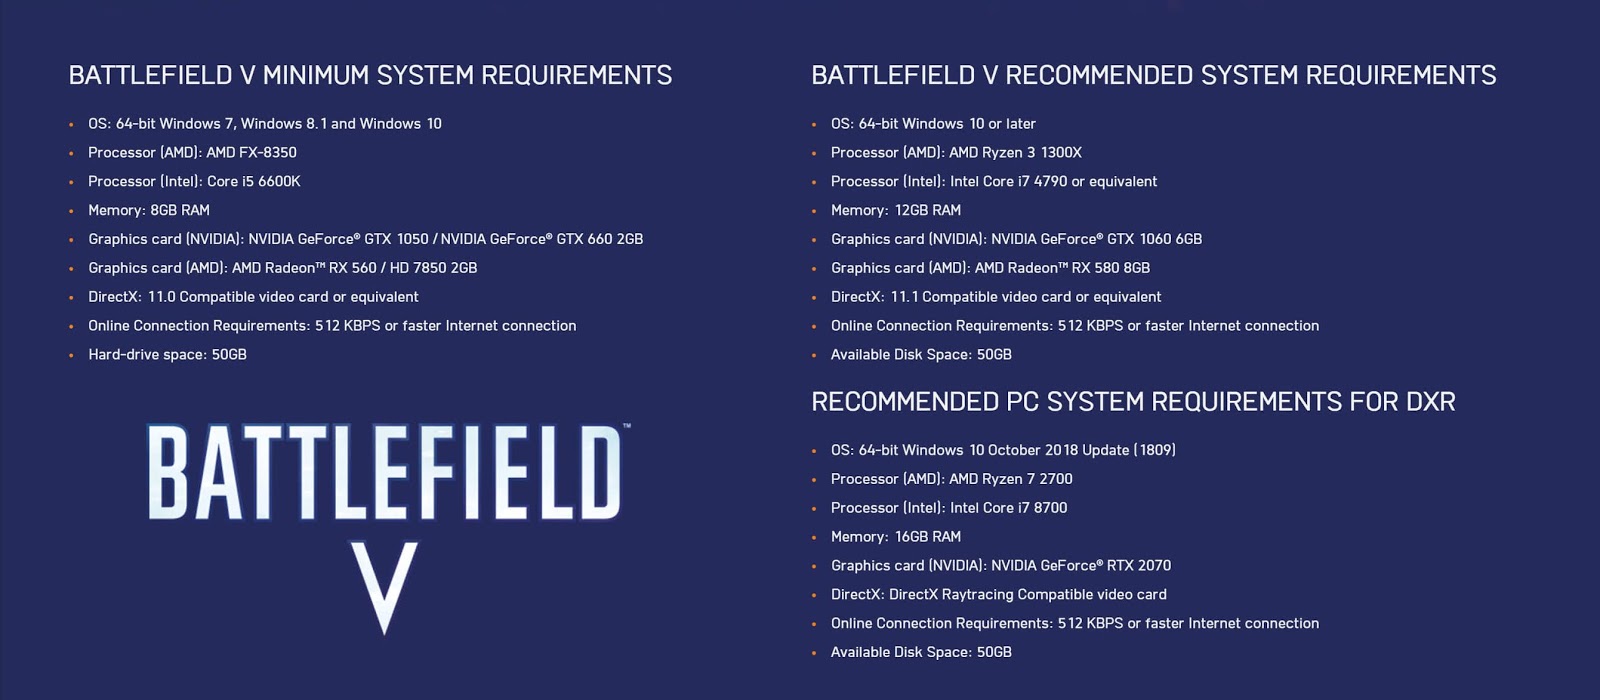 Official Battlefield V PC System Requirements